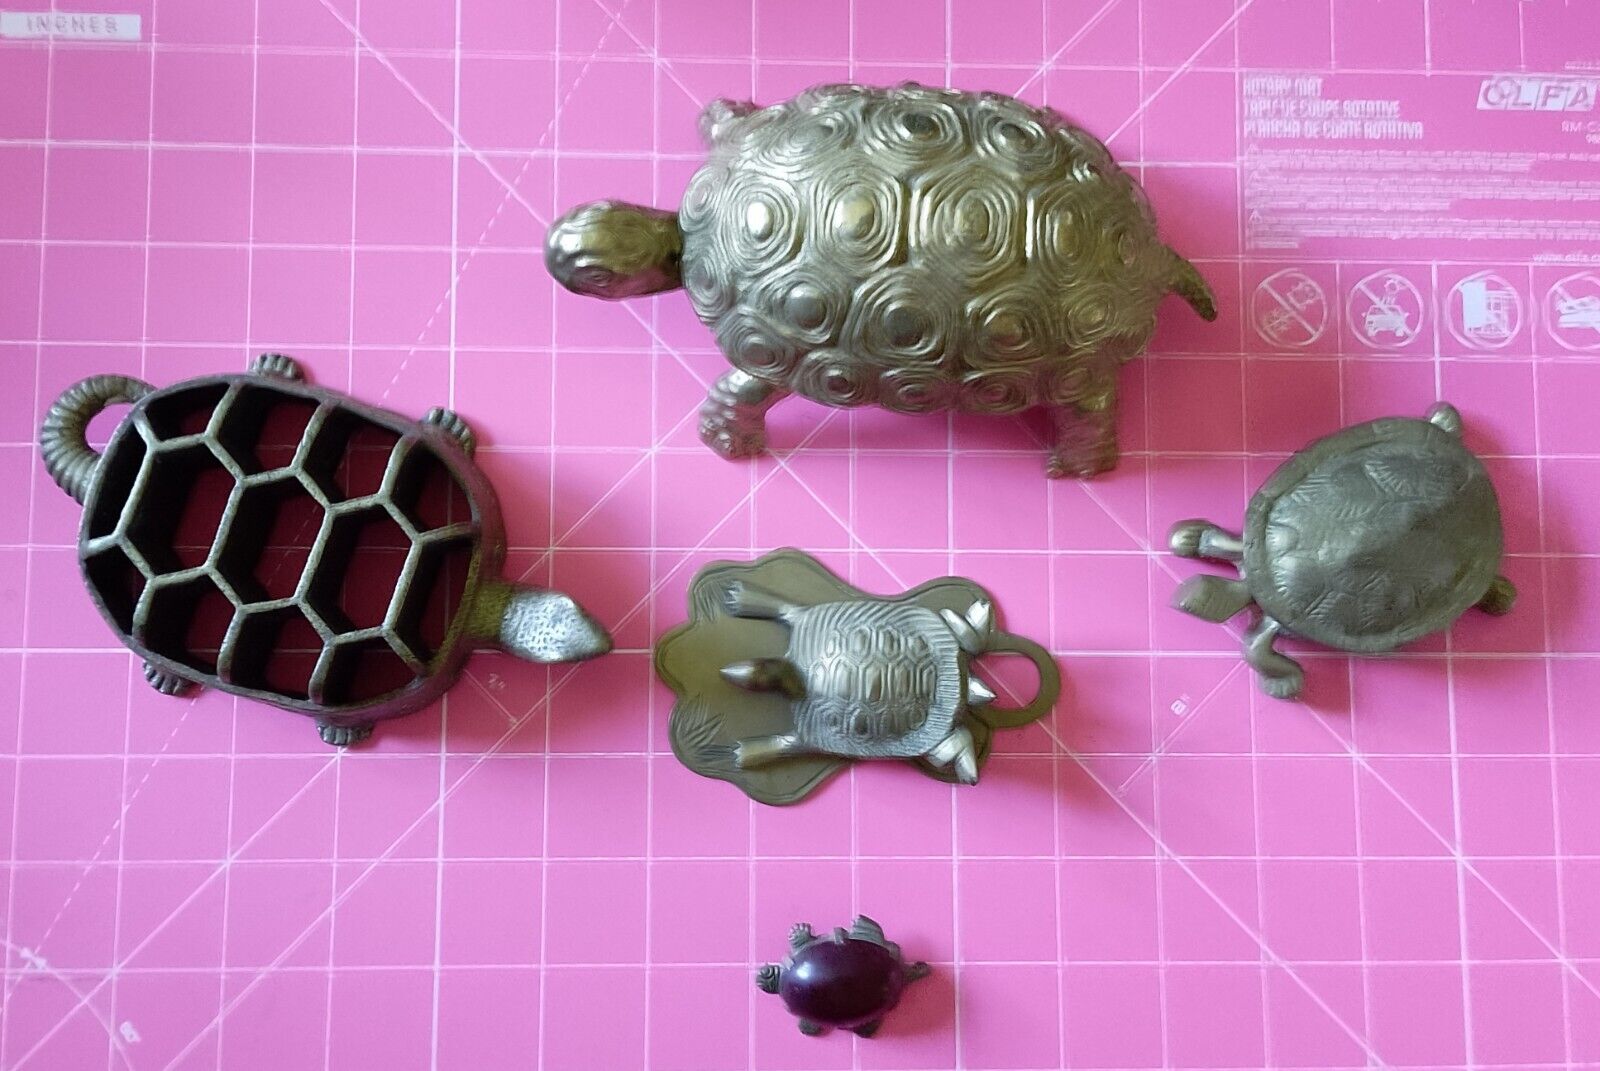 Grandma's Collection of Antique Brass Turtles includes trinket boxes & a brooch